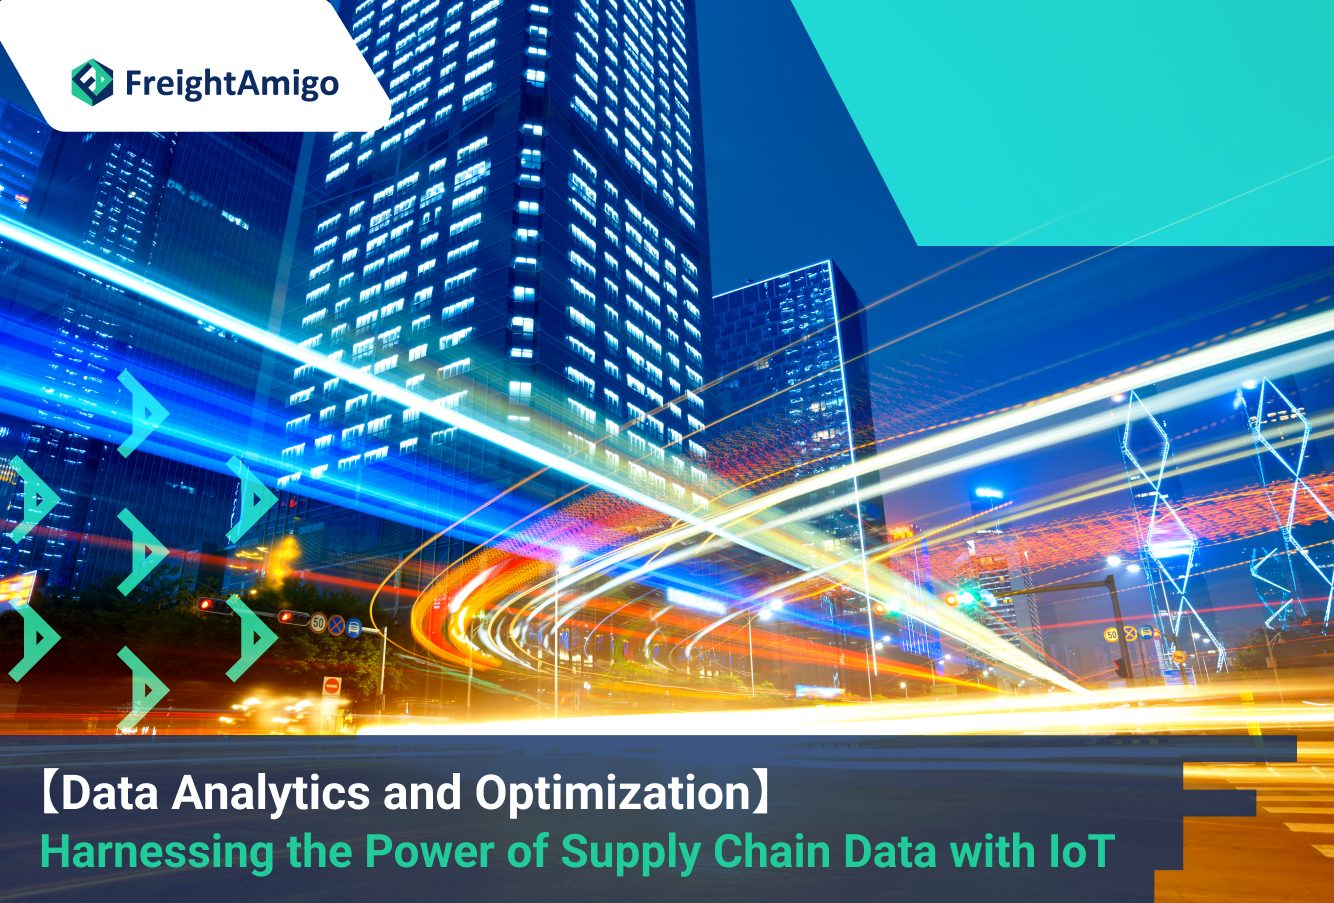 【Data Analytics and Optimization】 Harnessing the Power of Supply Chain Data with IoT